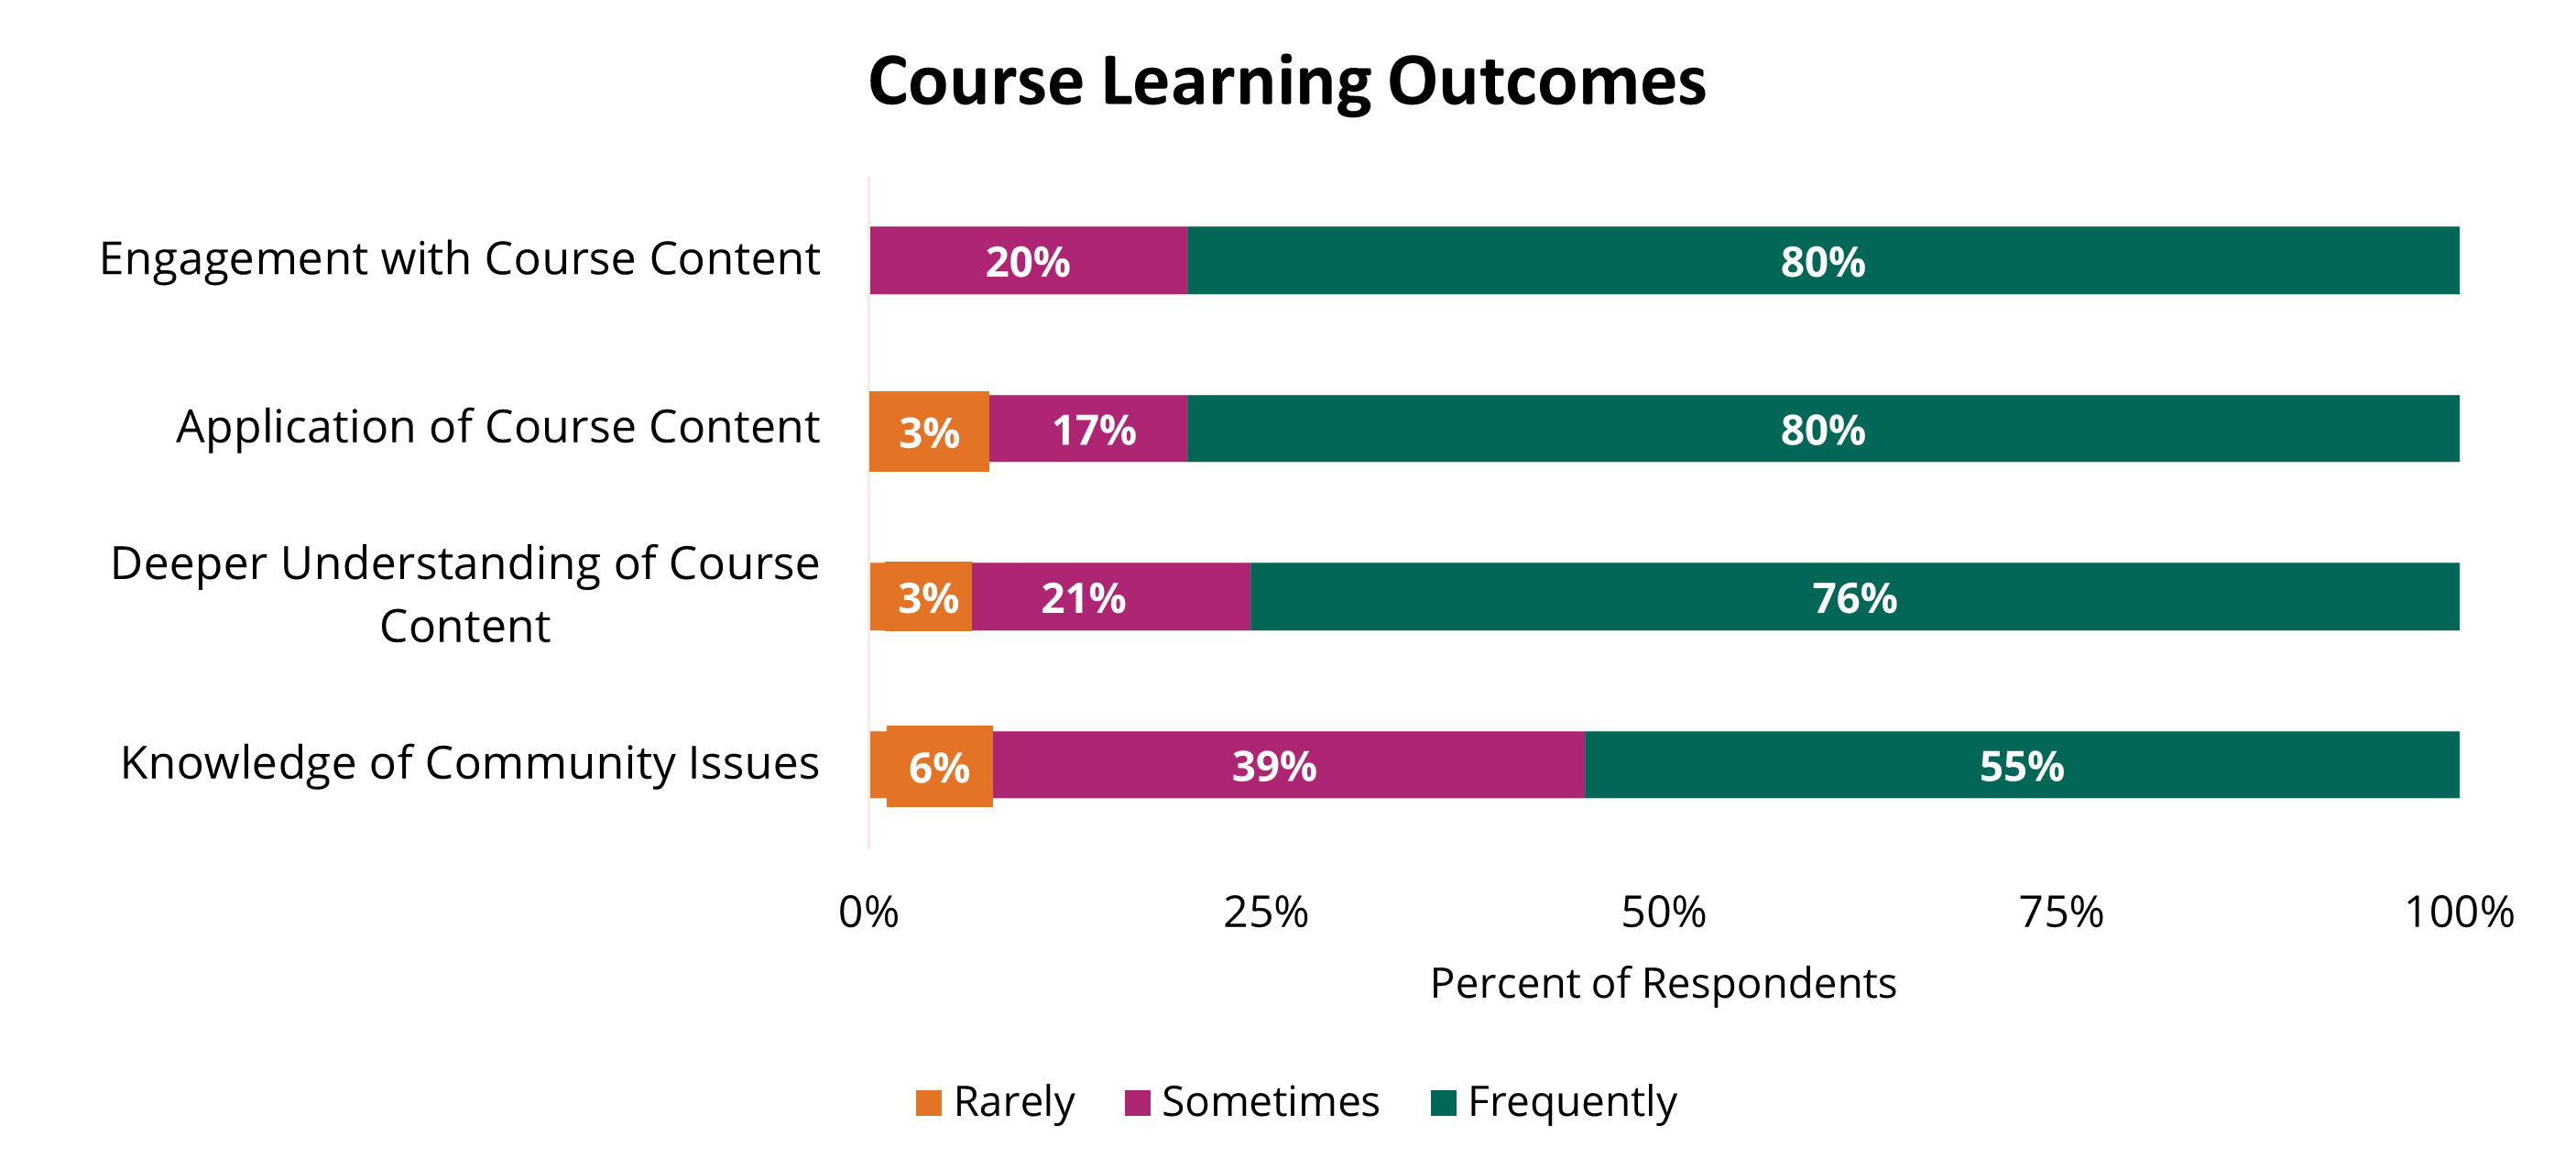 Chart showing Course Learning Outcomes